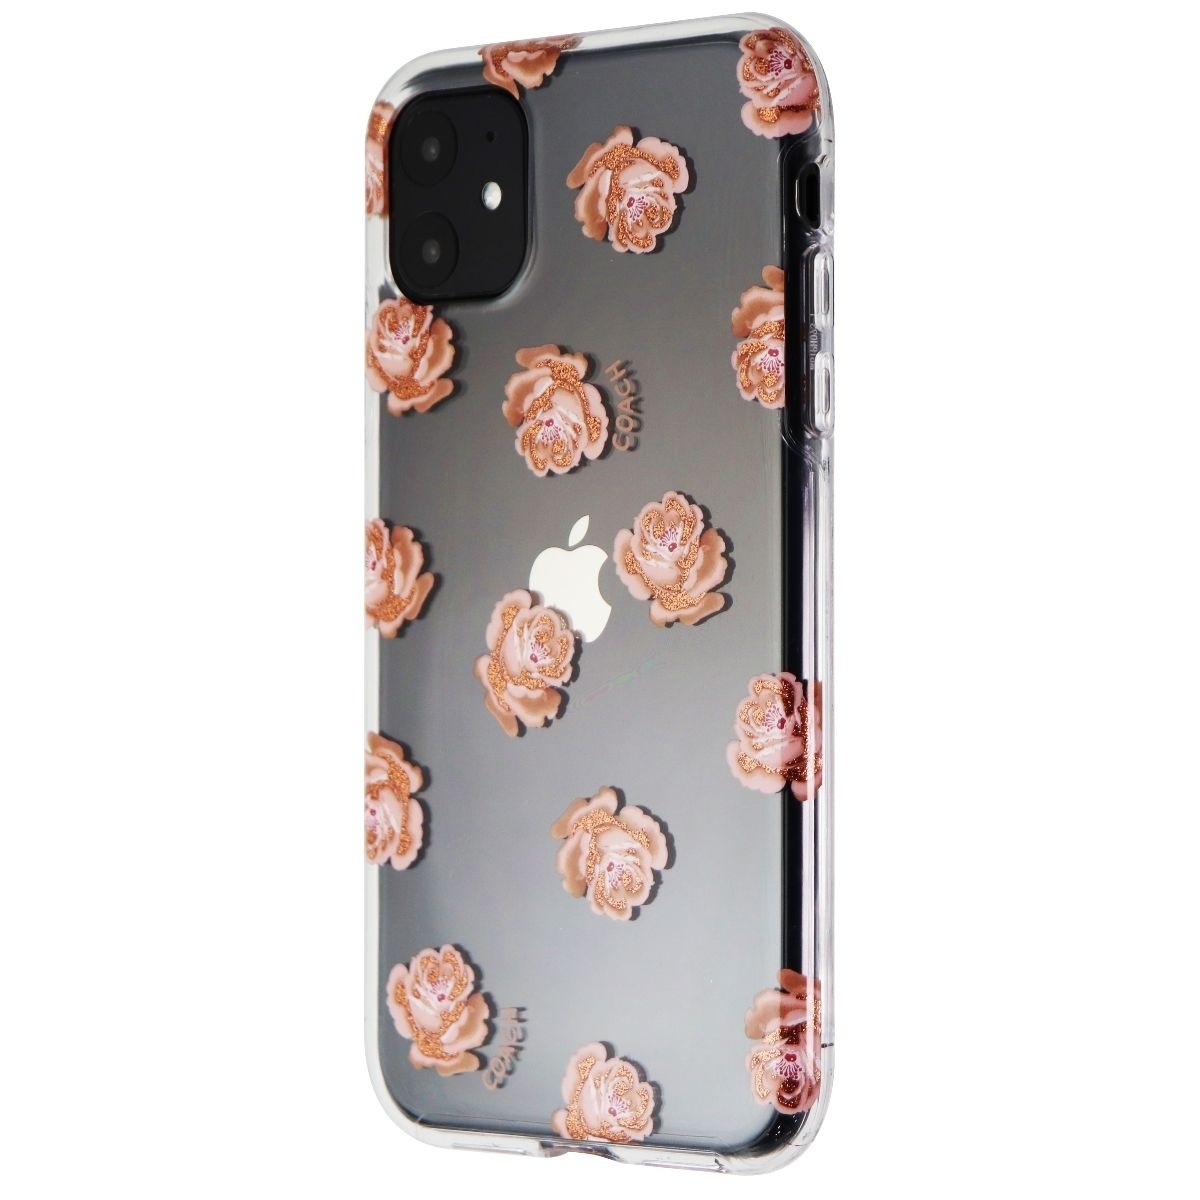 Coach Protective Case For Apple IPhone 11 - Dreamy Peony Clear/Pink/Glitter